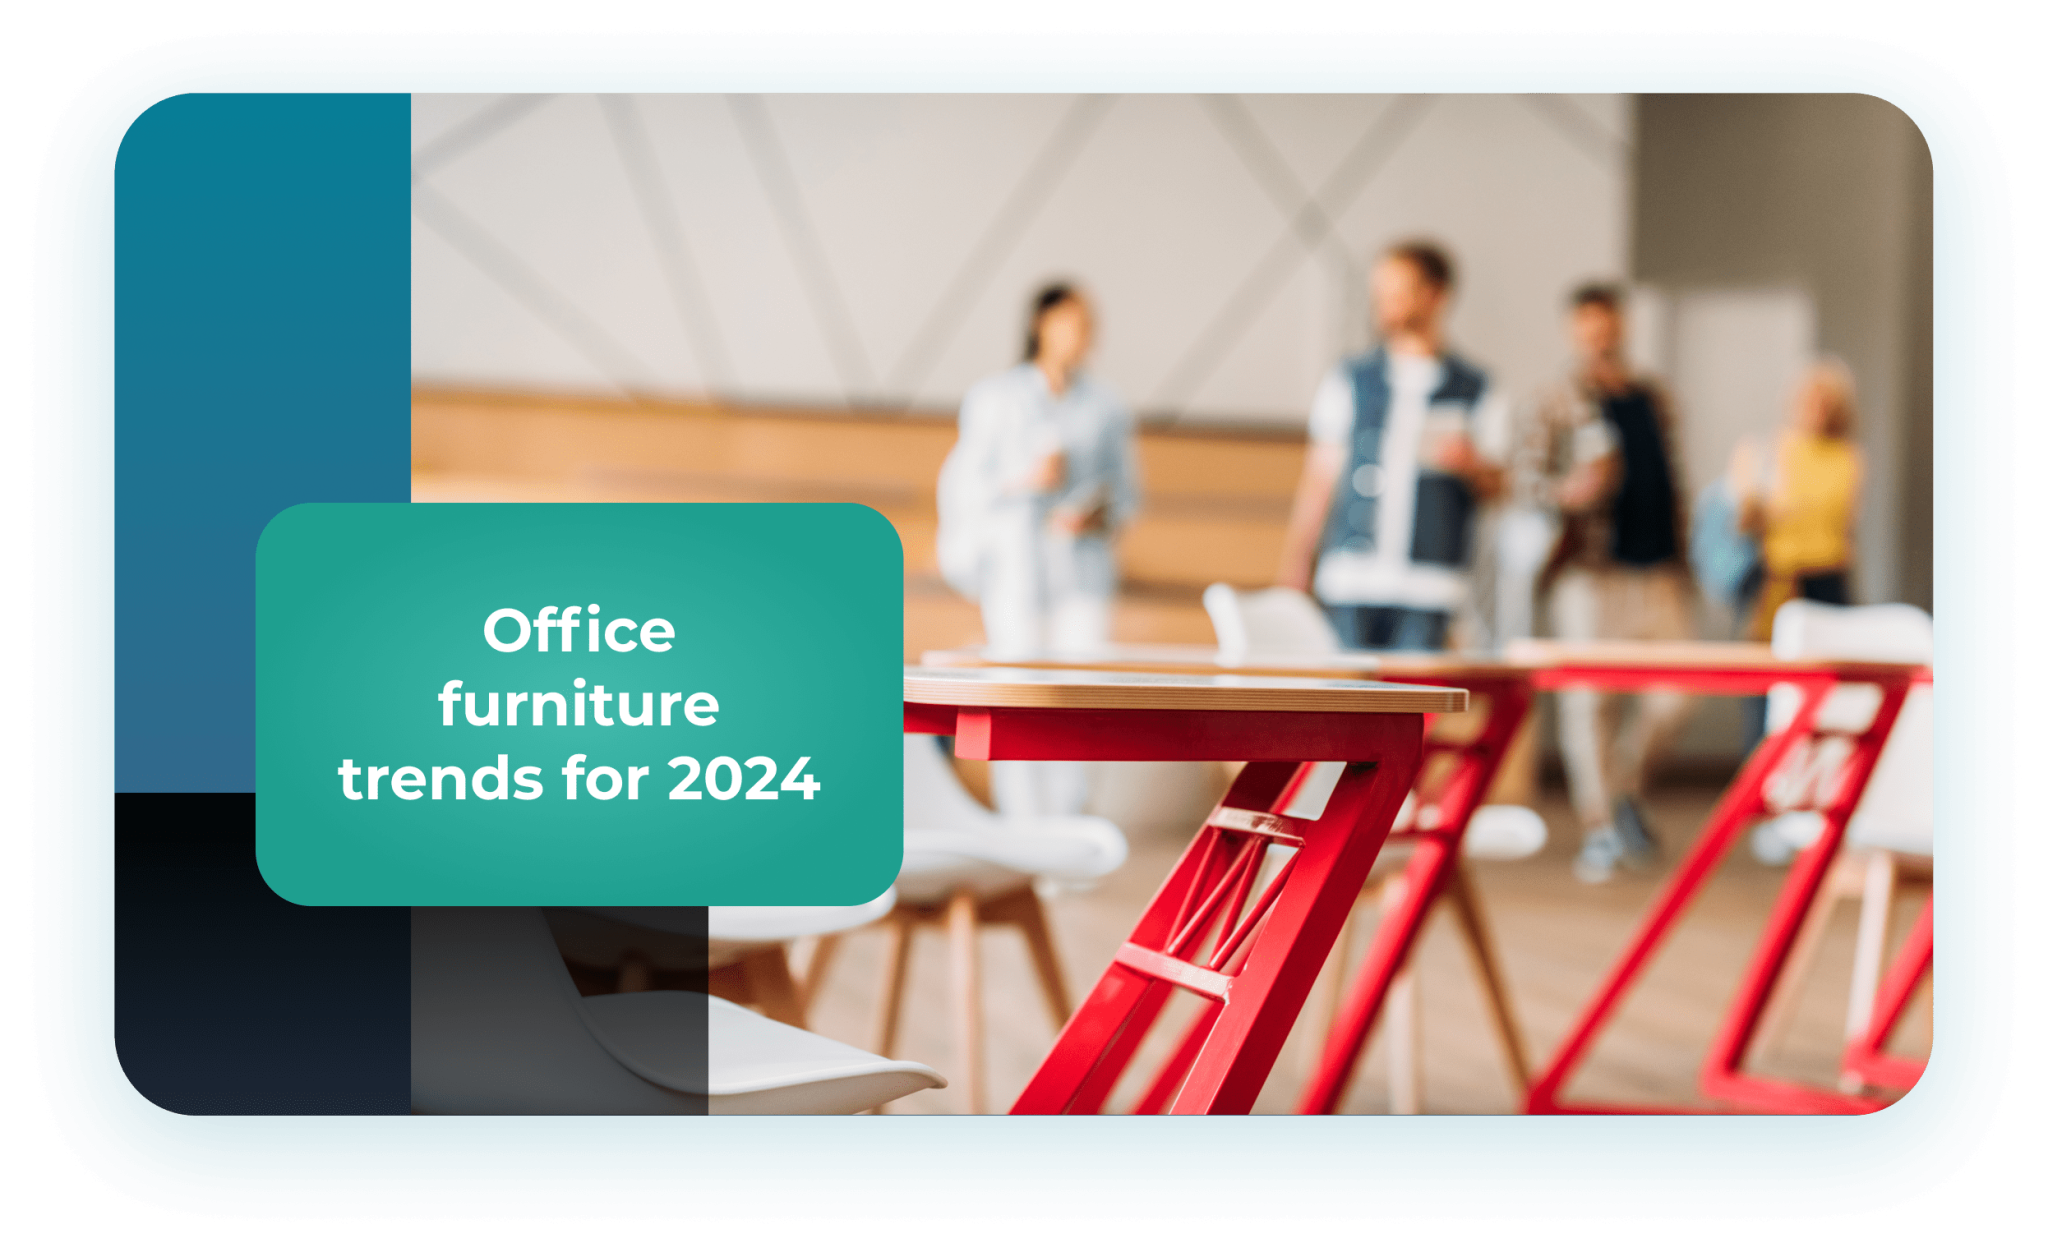 Office furniture trends for 2024